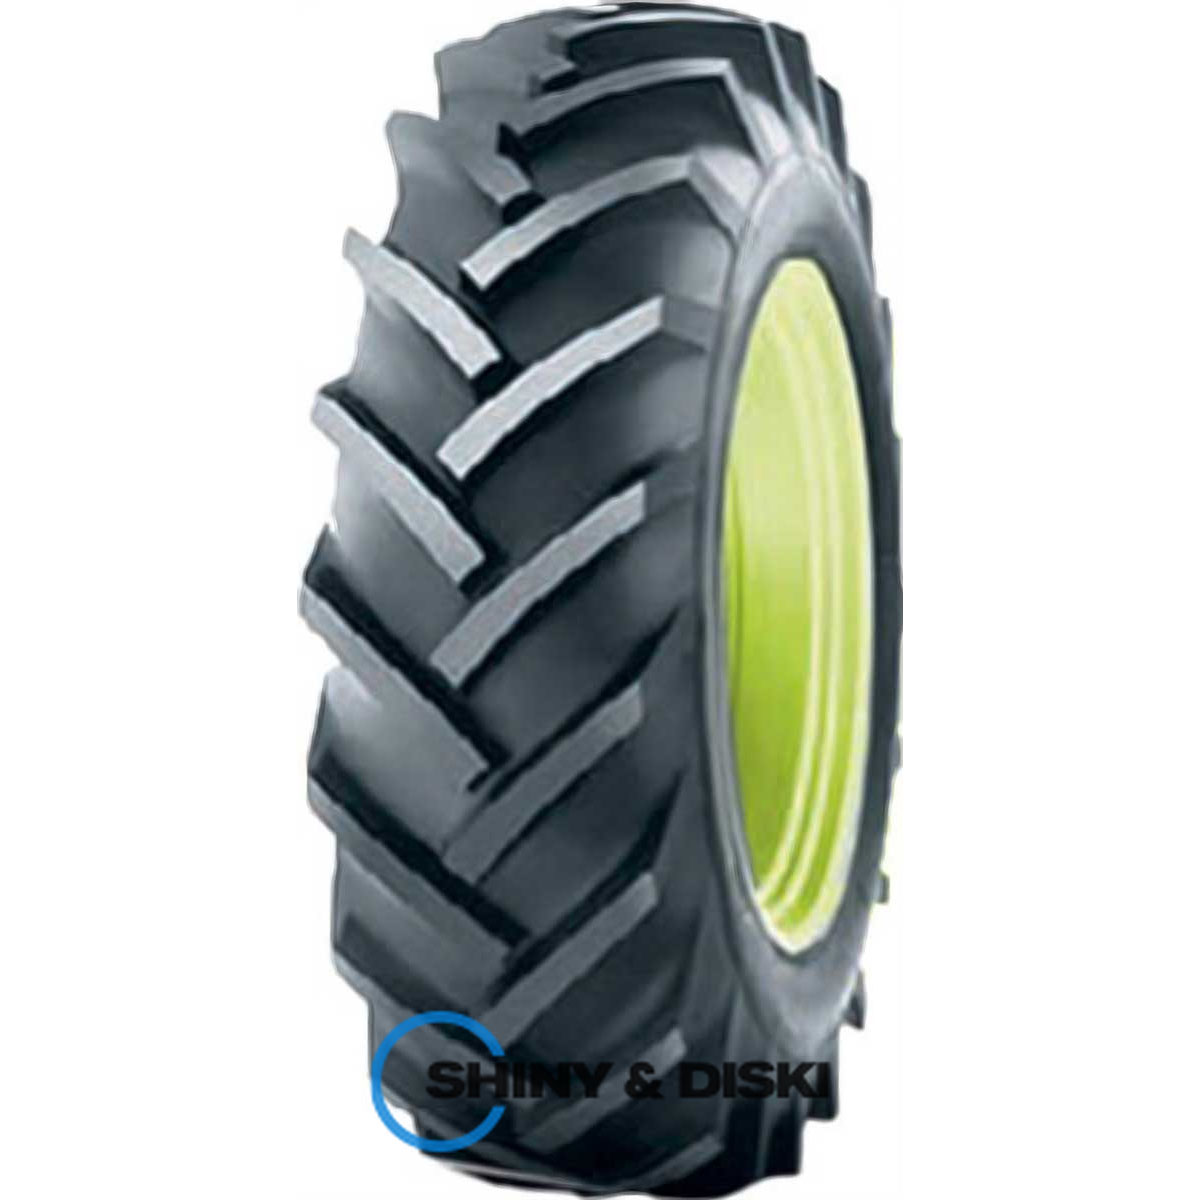 cultor as front 13 6.00-16 94a6/86a8